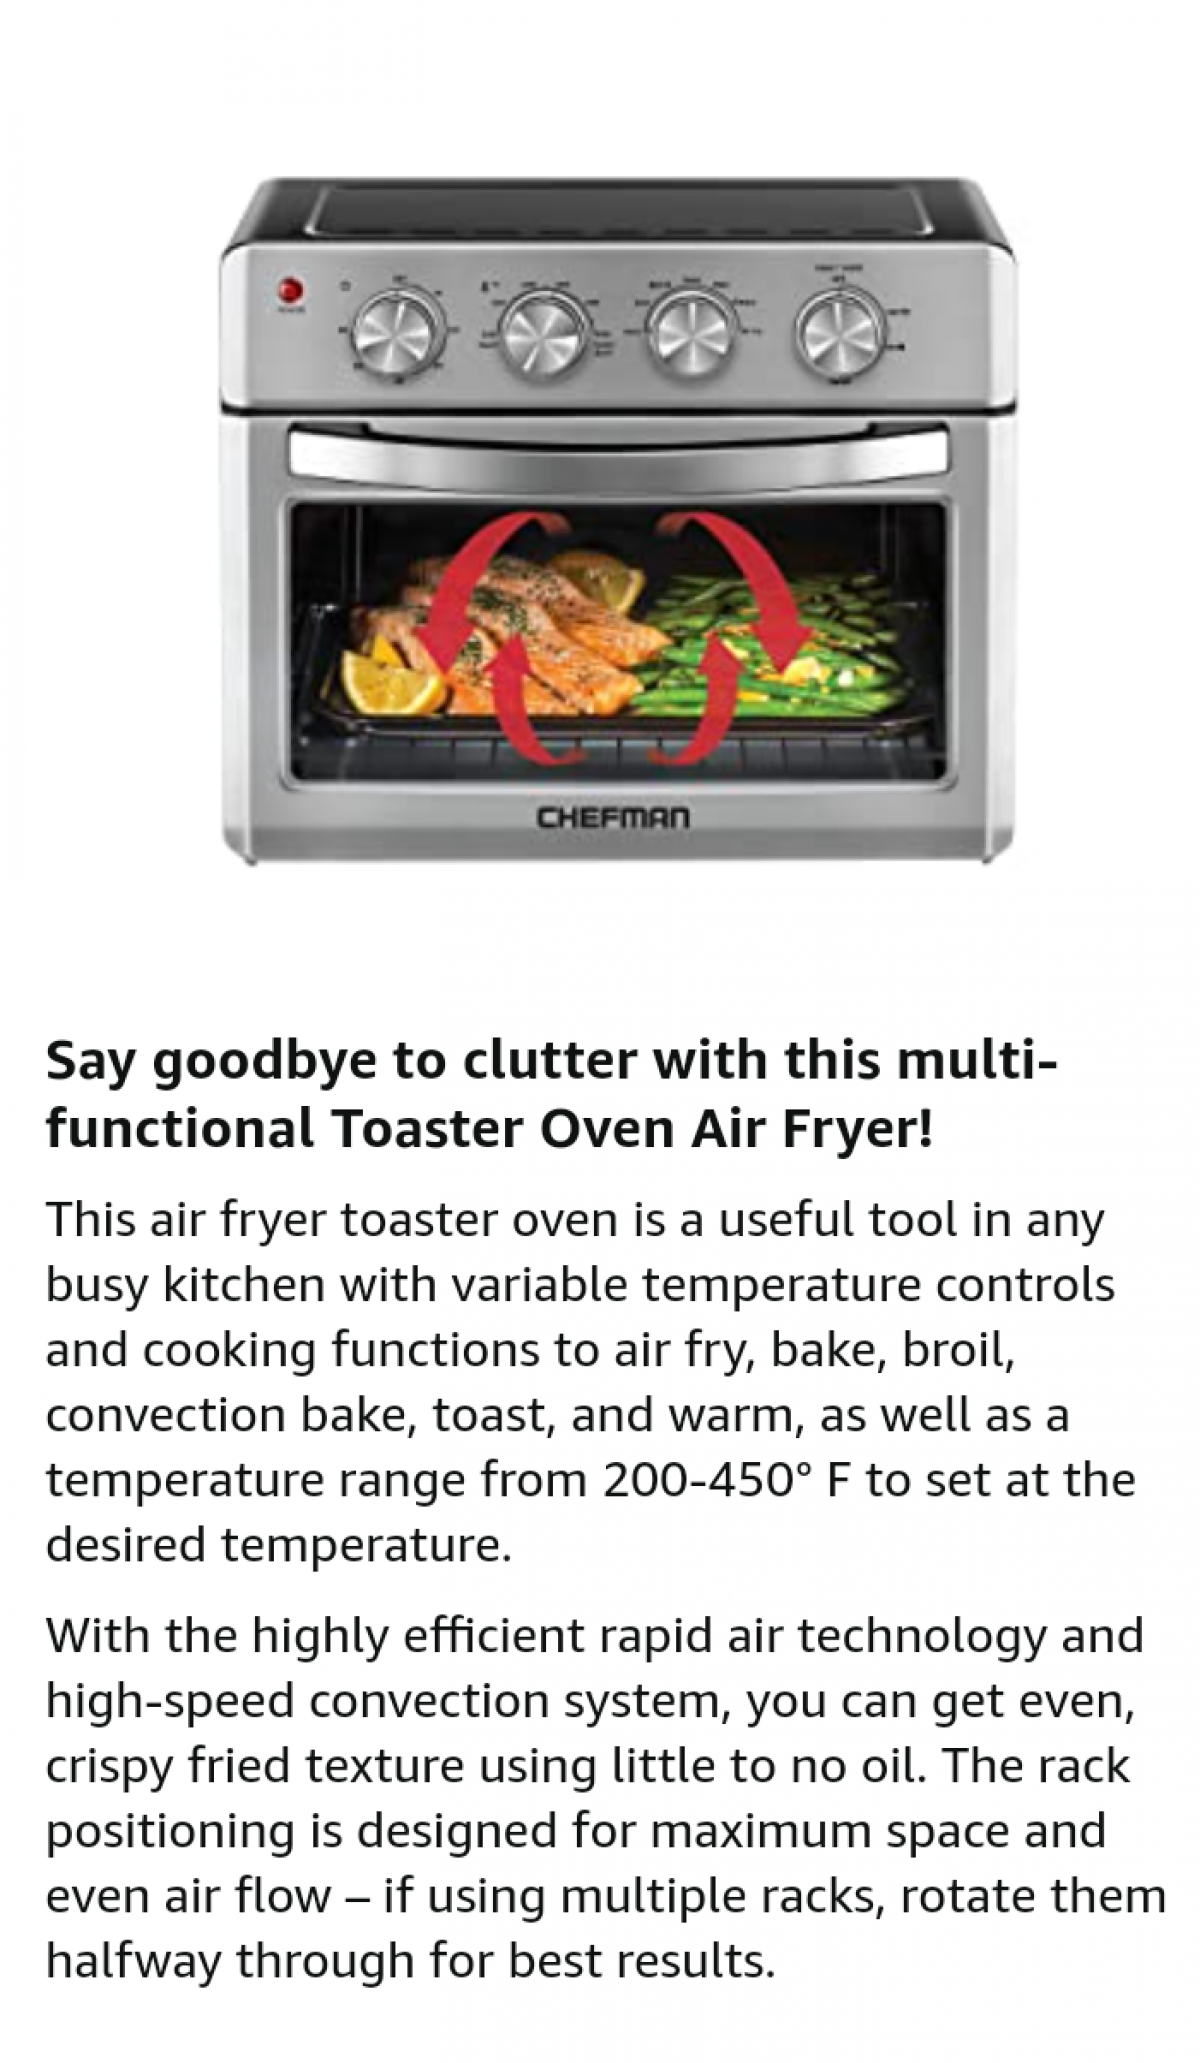 Chefman Air Fryer Toaster Oven, 6 Slice, 26 QT Con for sale in Portmore